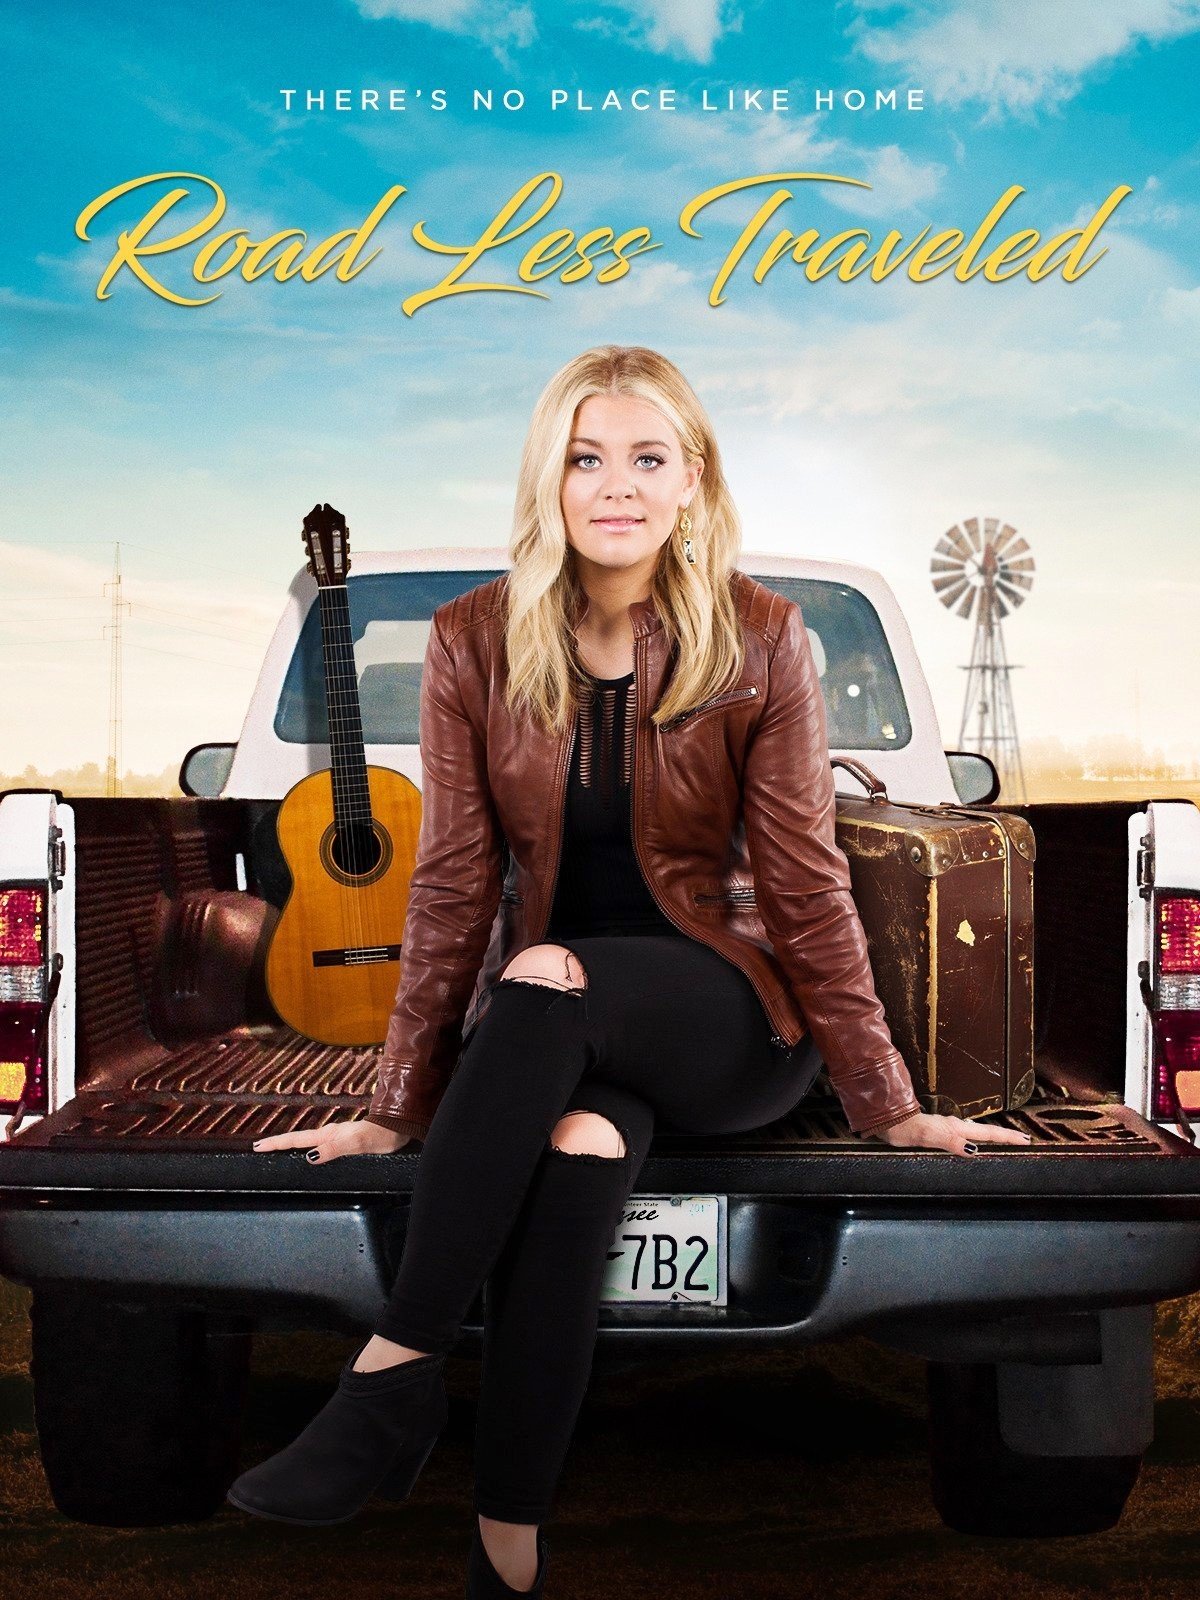 Poster of MarVista Entertainment's Road Less Traveled (2017)